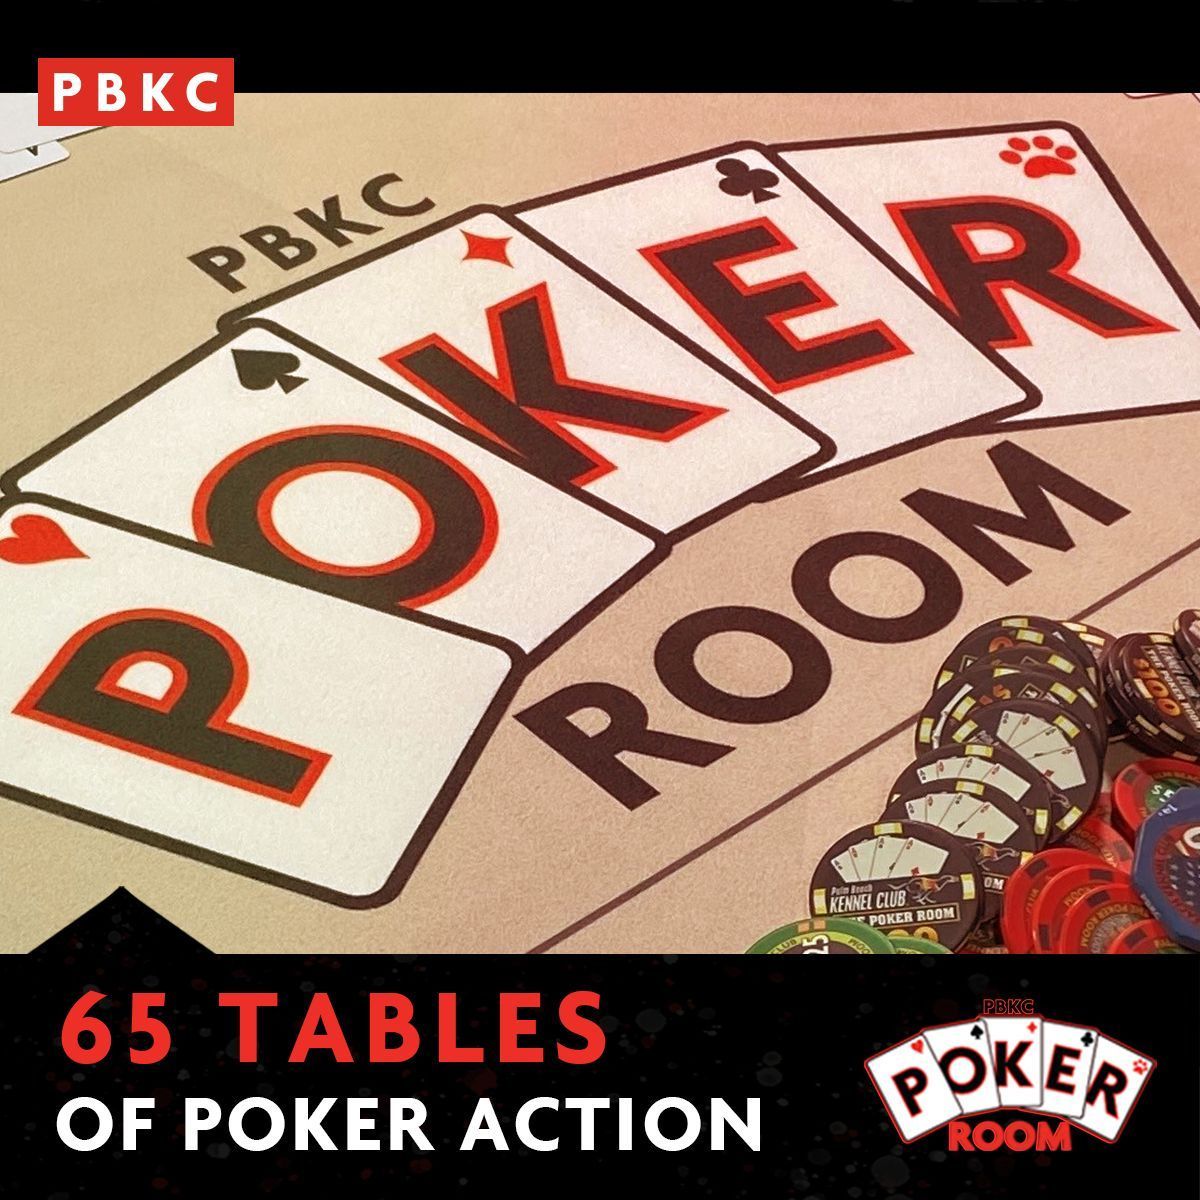 65 Tables of Poker Action! Come play poker at the Action Palace! Open till 3am! buff.ly/46RaWpW #poker #pokertournament #tablegames #westpalmbeach #southflorida